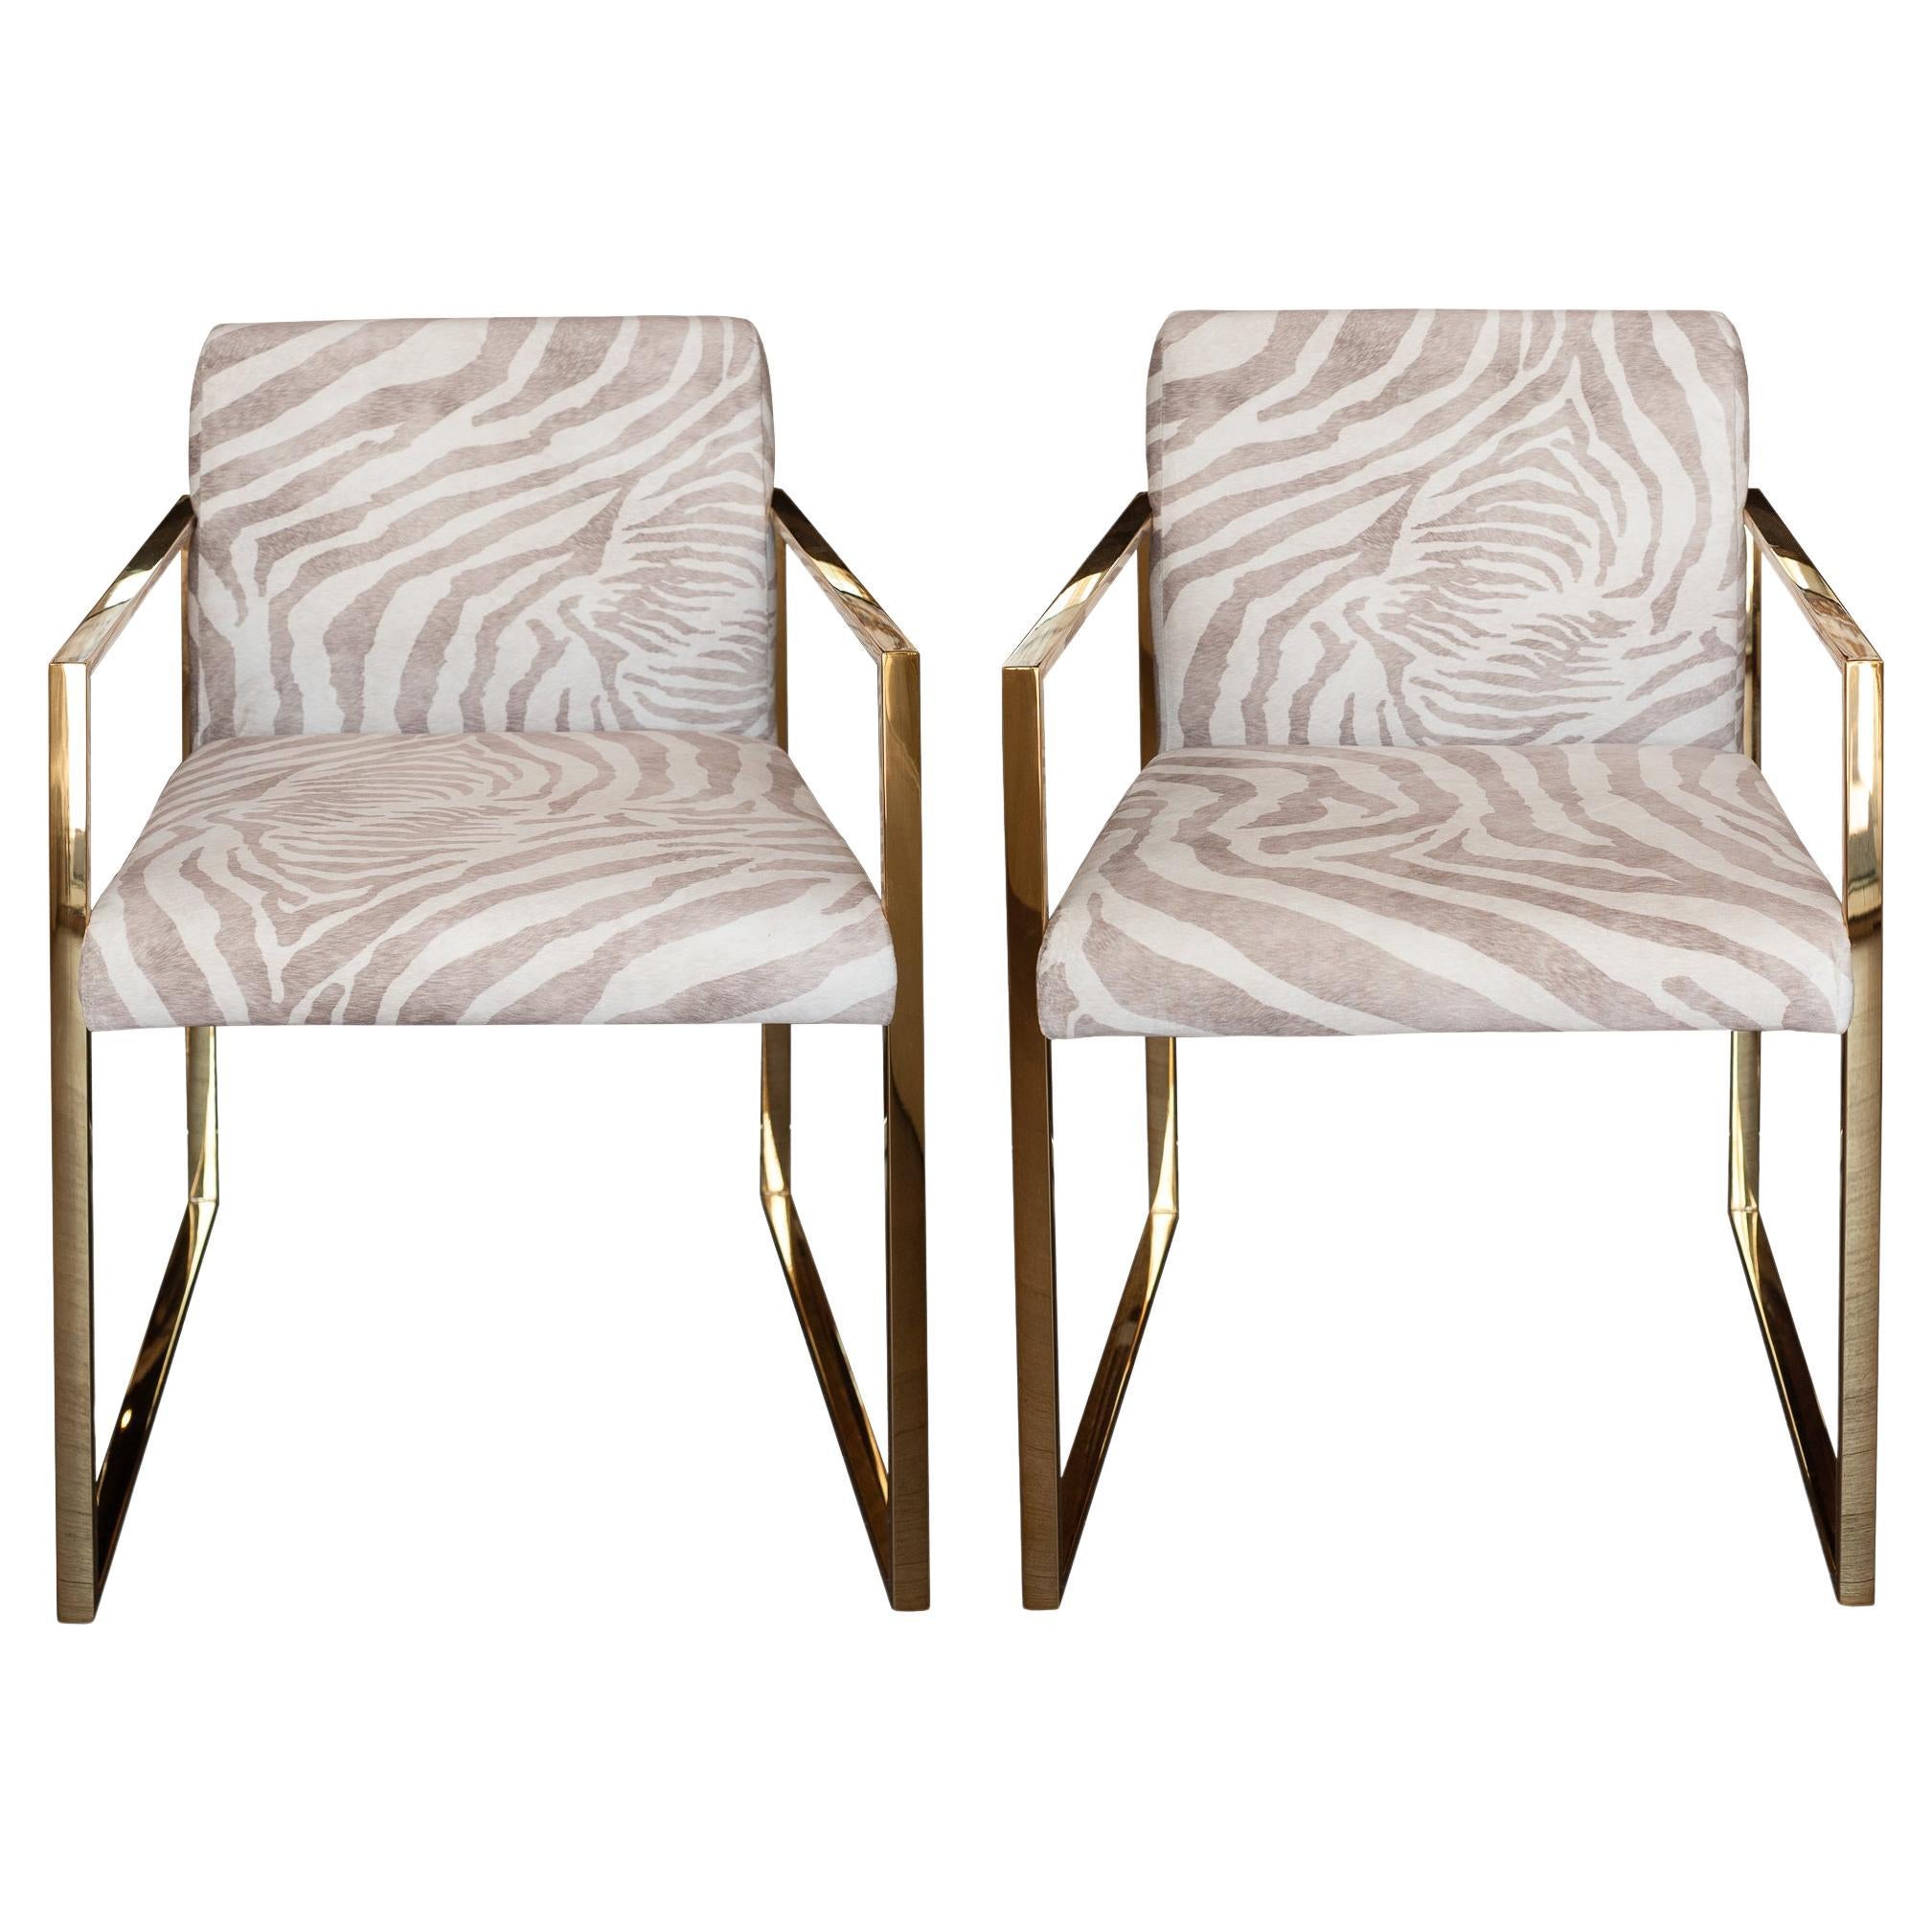 Contemporary Pair of Polished Brass and Zebra-Print Fabric Upholstered Armchairs For Sale